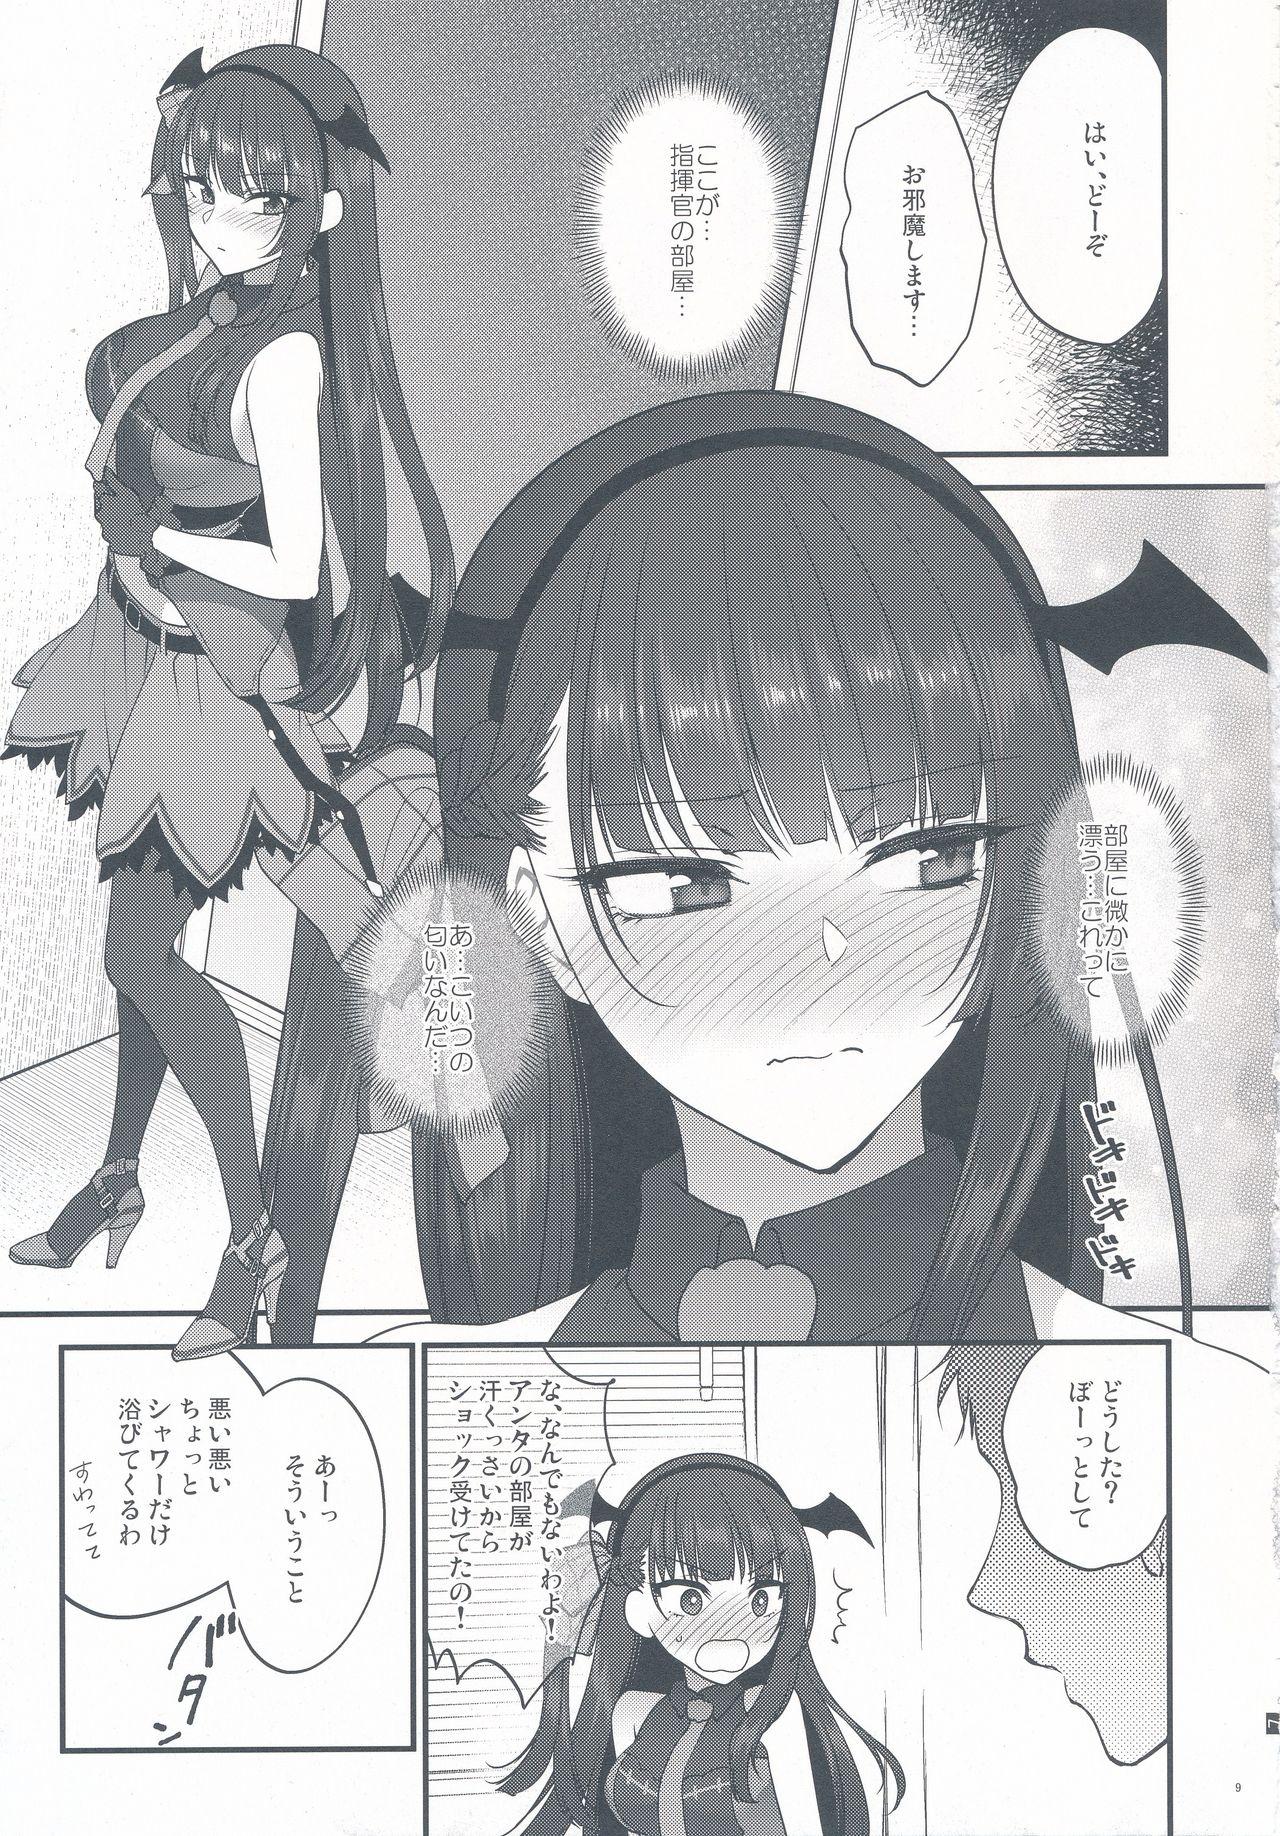 People Having Sex Obake nante Inai! - Girls frontline Spit - Page 9